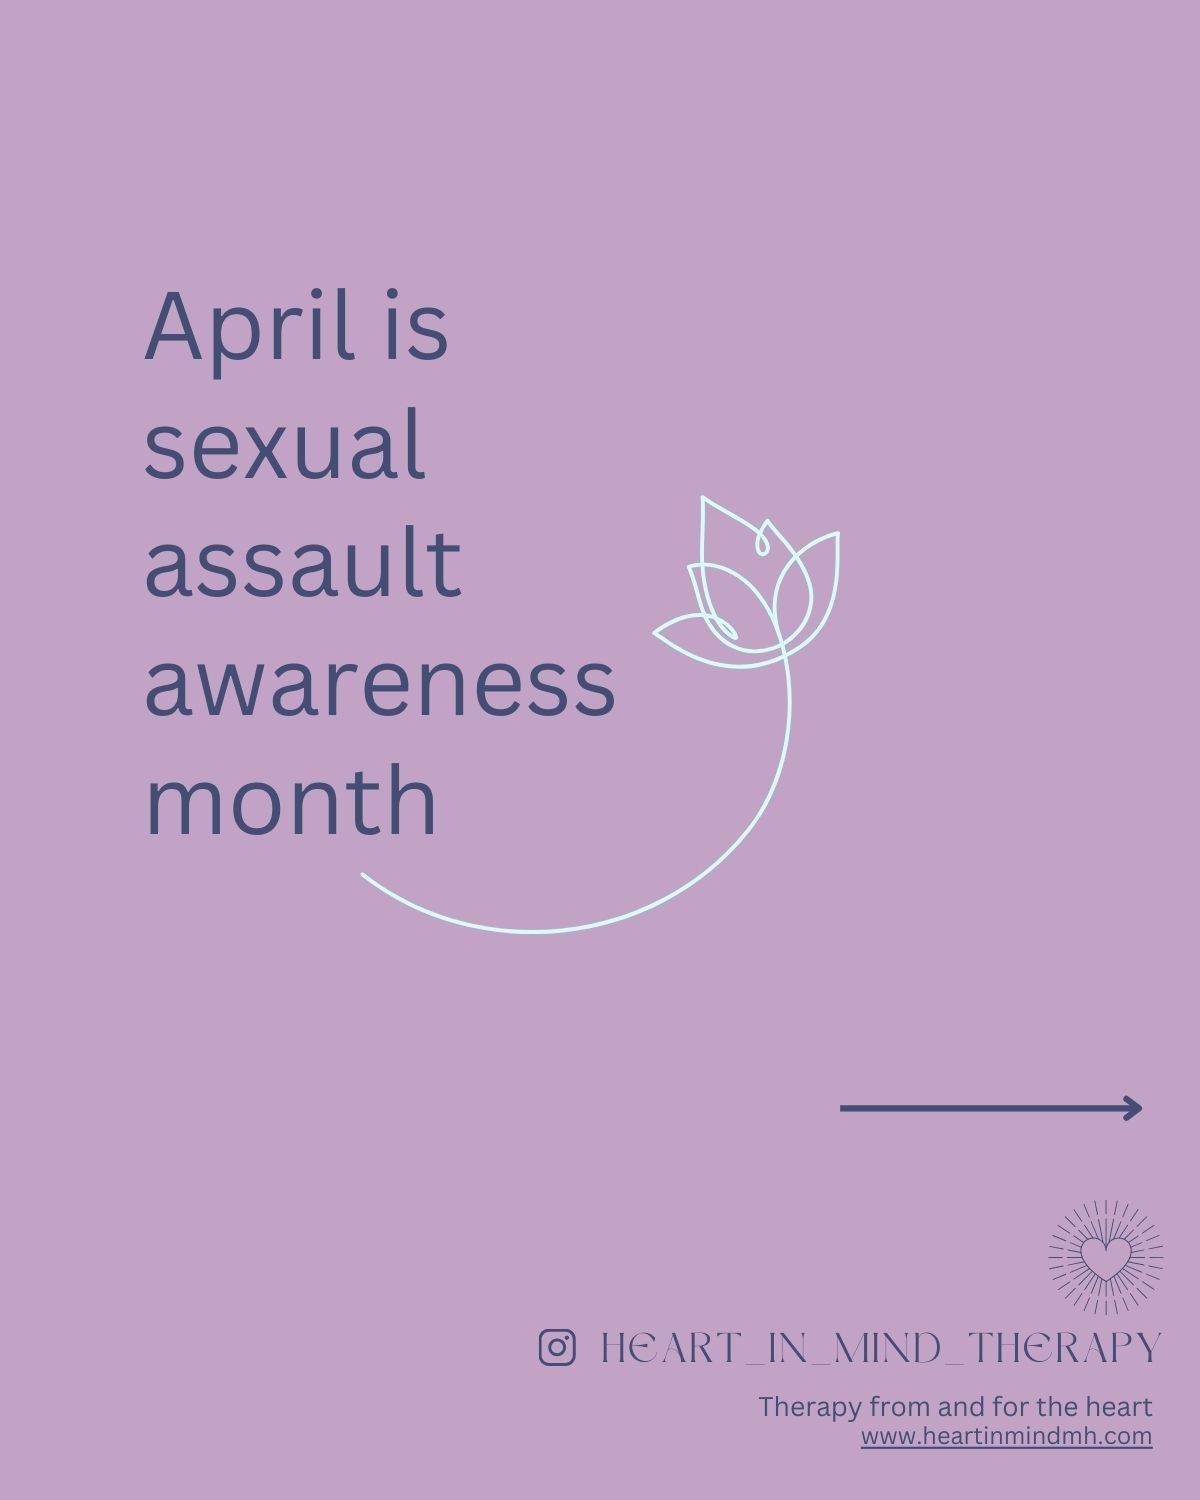 Every April is Sexual Assault Awareness Month. 

This year, on this month, I thought I'd share about one of the more inconspicous aspects of sexual assault-- experiences that don't fit the legal definition of sexual assault but feel sexually violatin